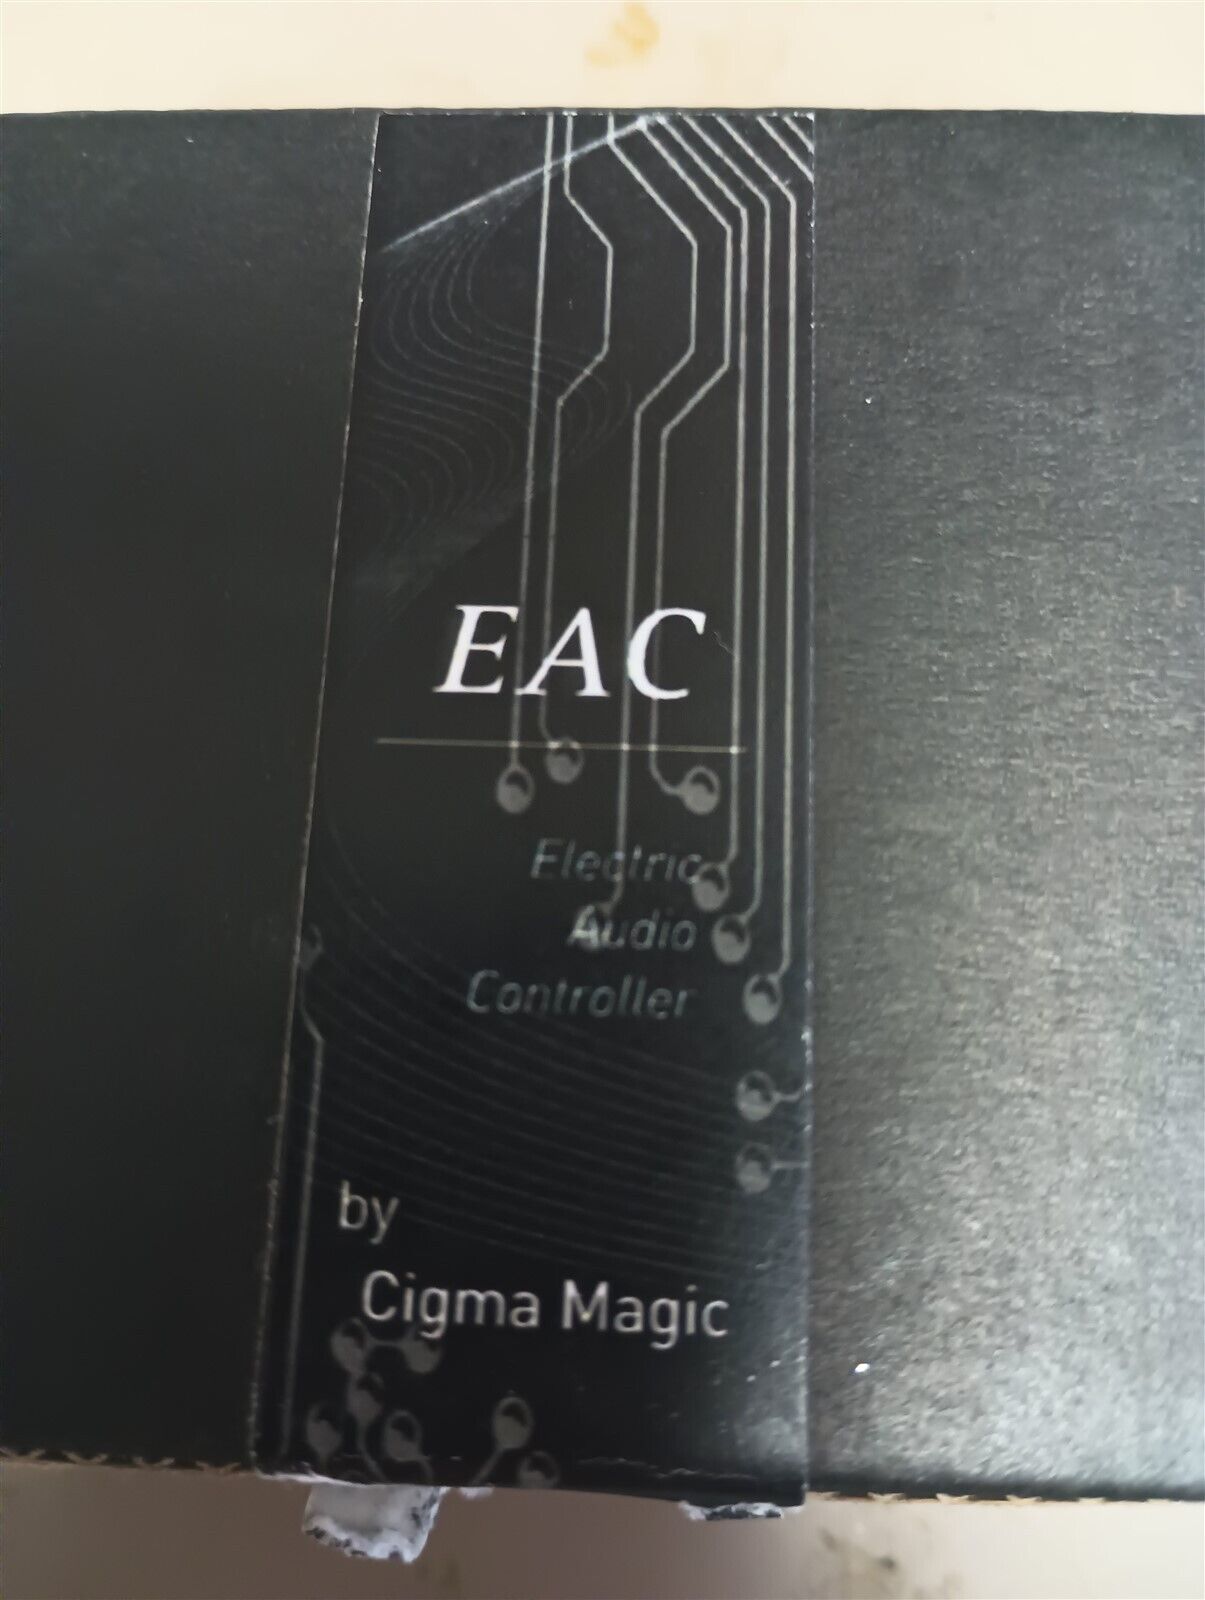 EAC (Electric Audio Controller) by CIGMA Magic